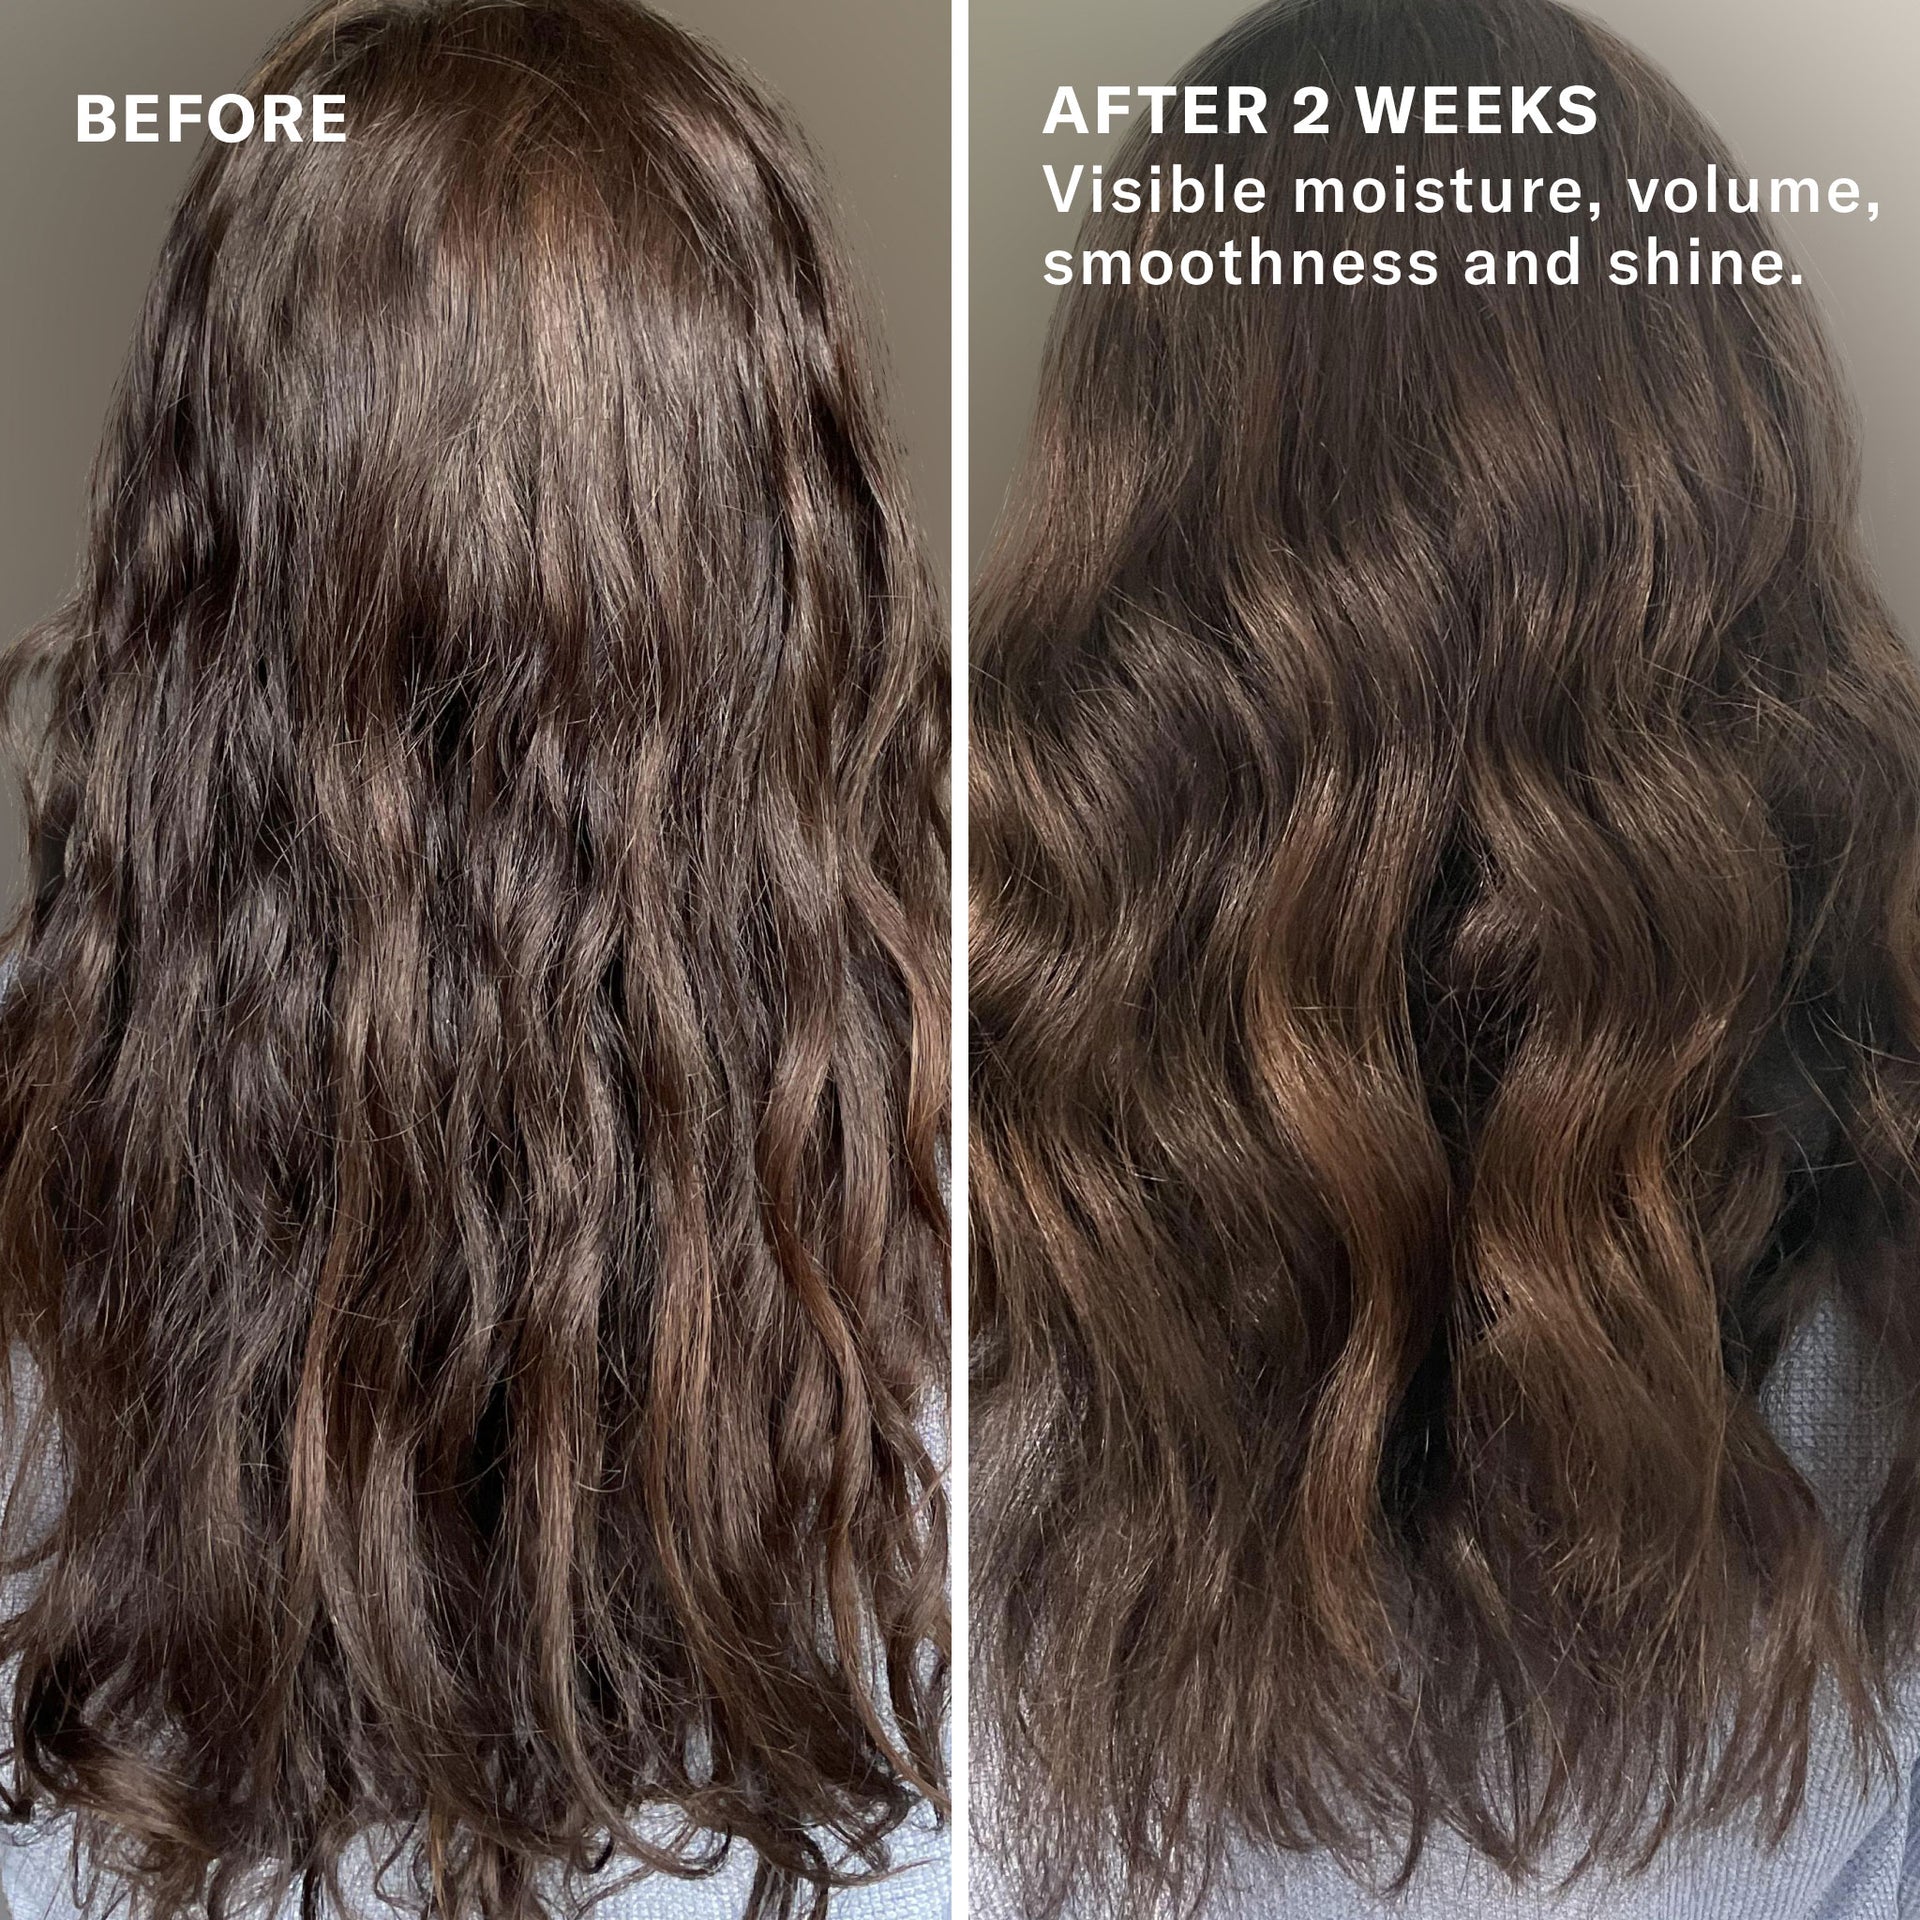 Before and After 2 Weeks. Visible moisture, volume, smoothness, and shine. 